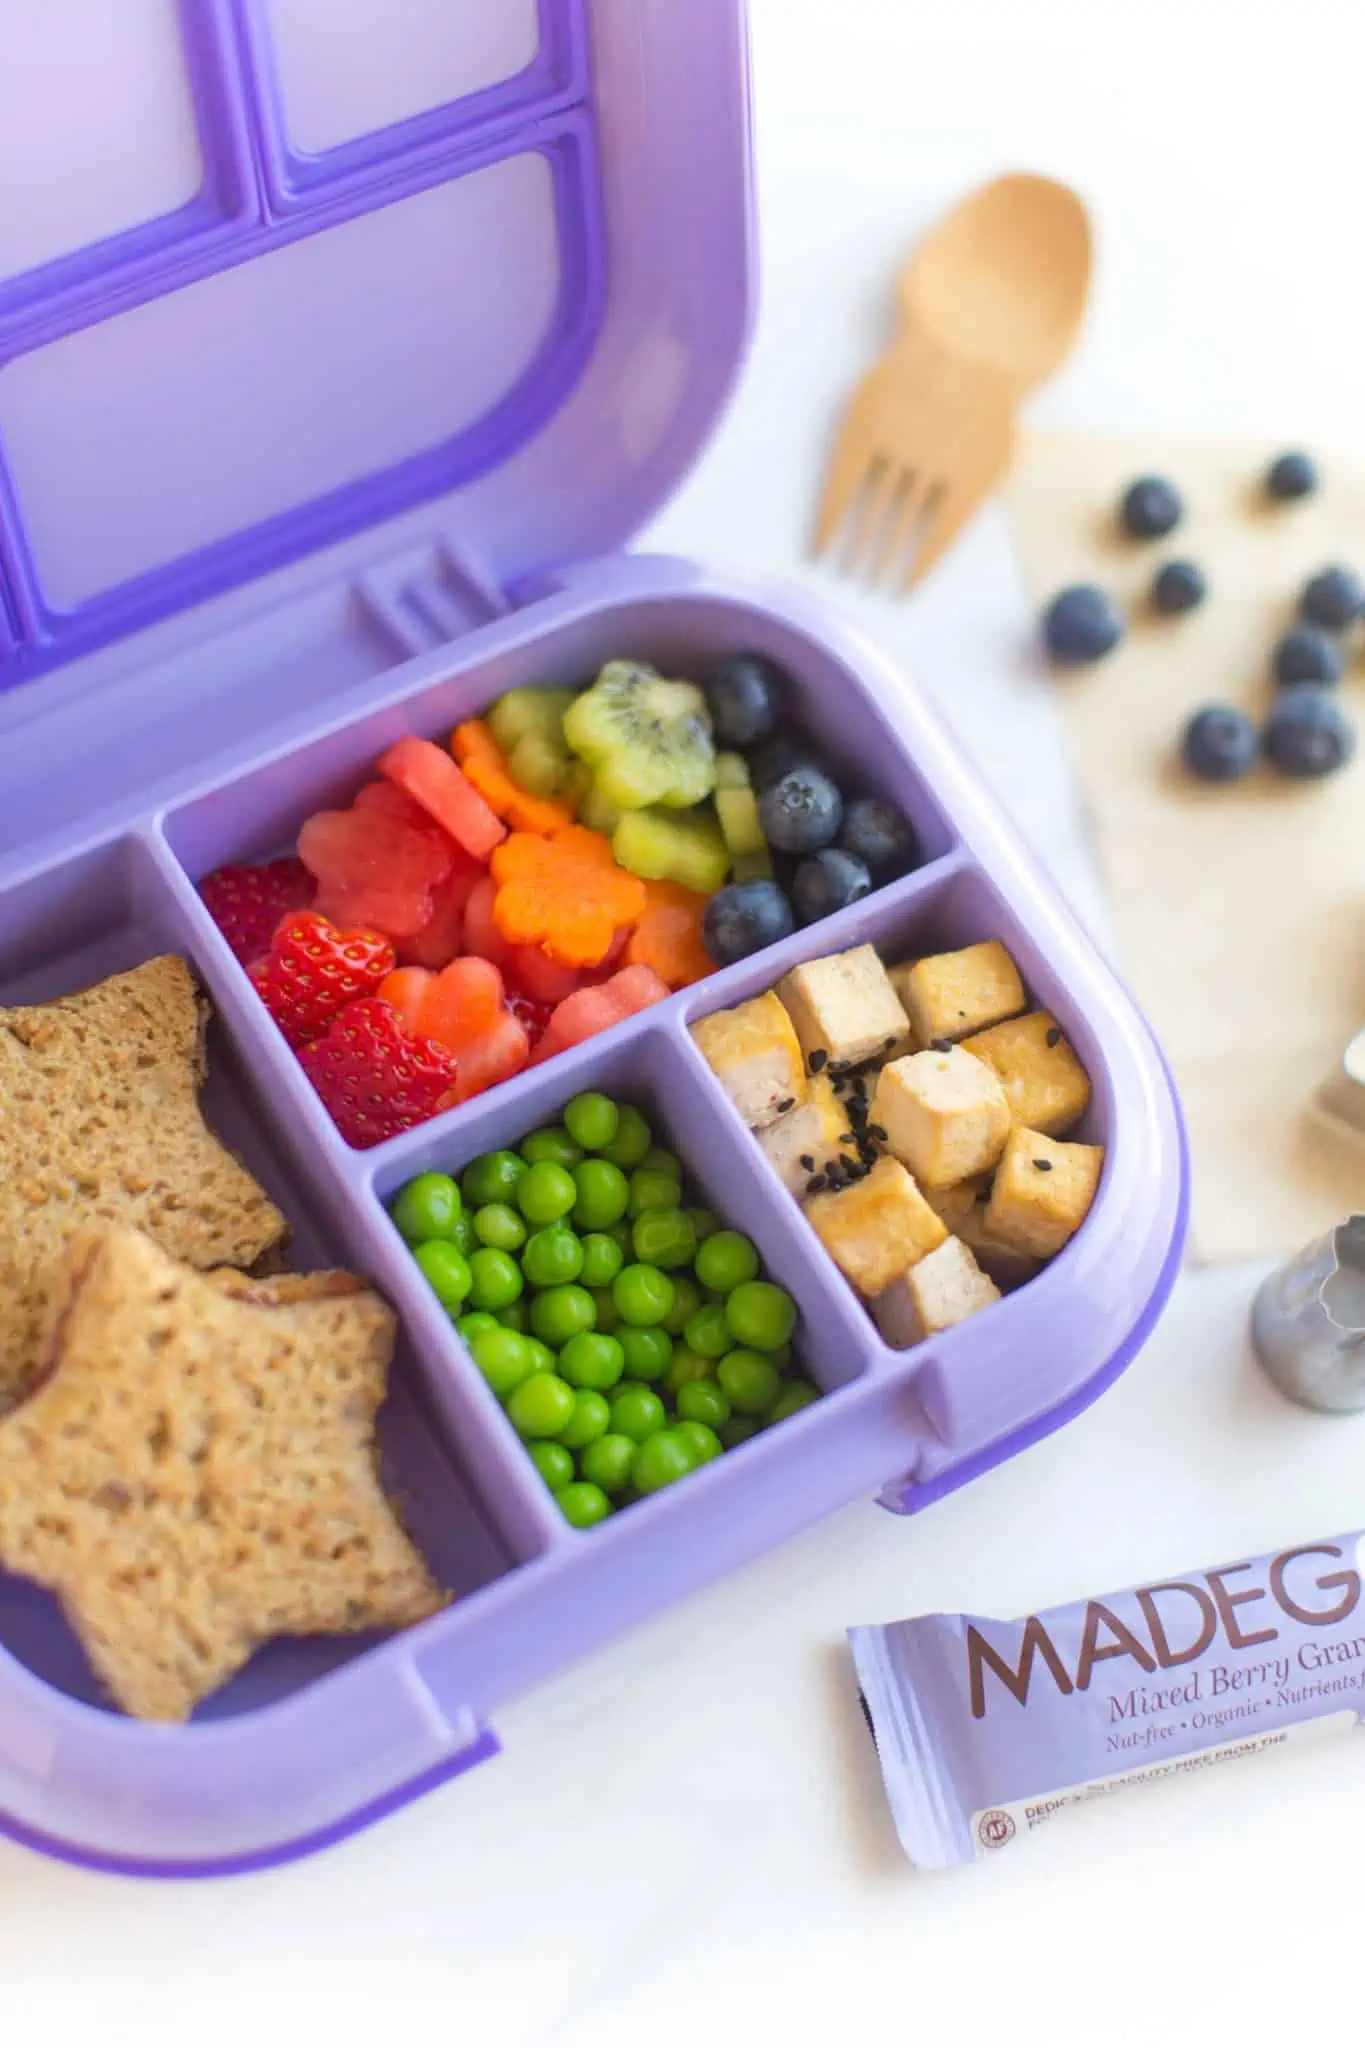 Purple kids lunchbox with vegan food including tofu, peas, veggies, peanut butter and jelly sandwich. 